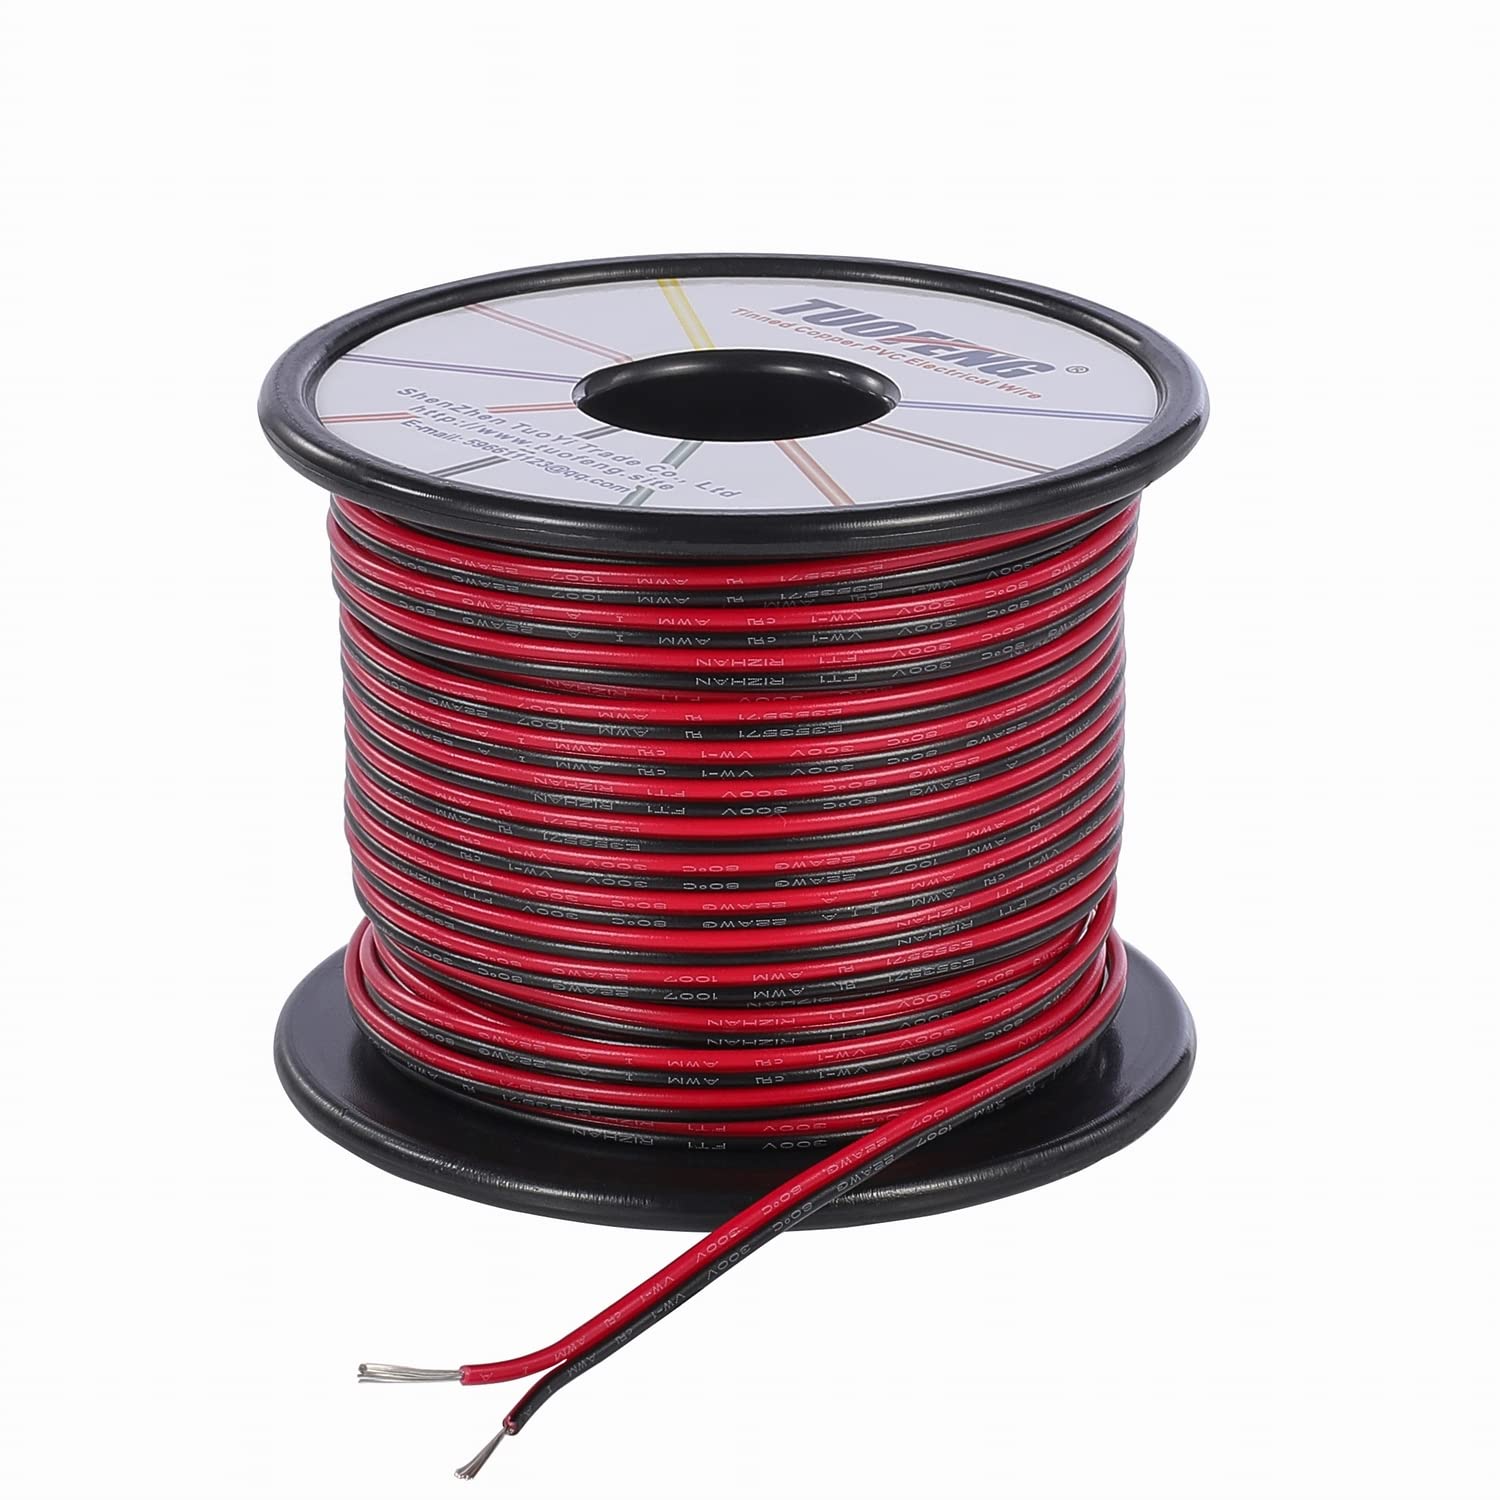 TUOFENG 22awg Electrical Wire 100 ft 22 Gauge Led Wire 2 Pin Extension Cable Wire Red Black Wires 12V/24V DC Cable for Led Strip